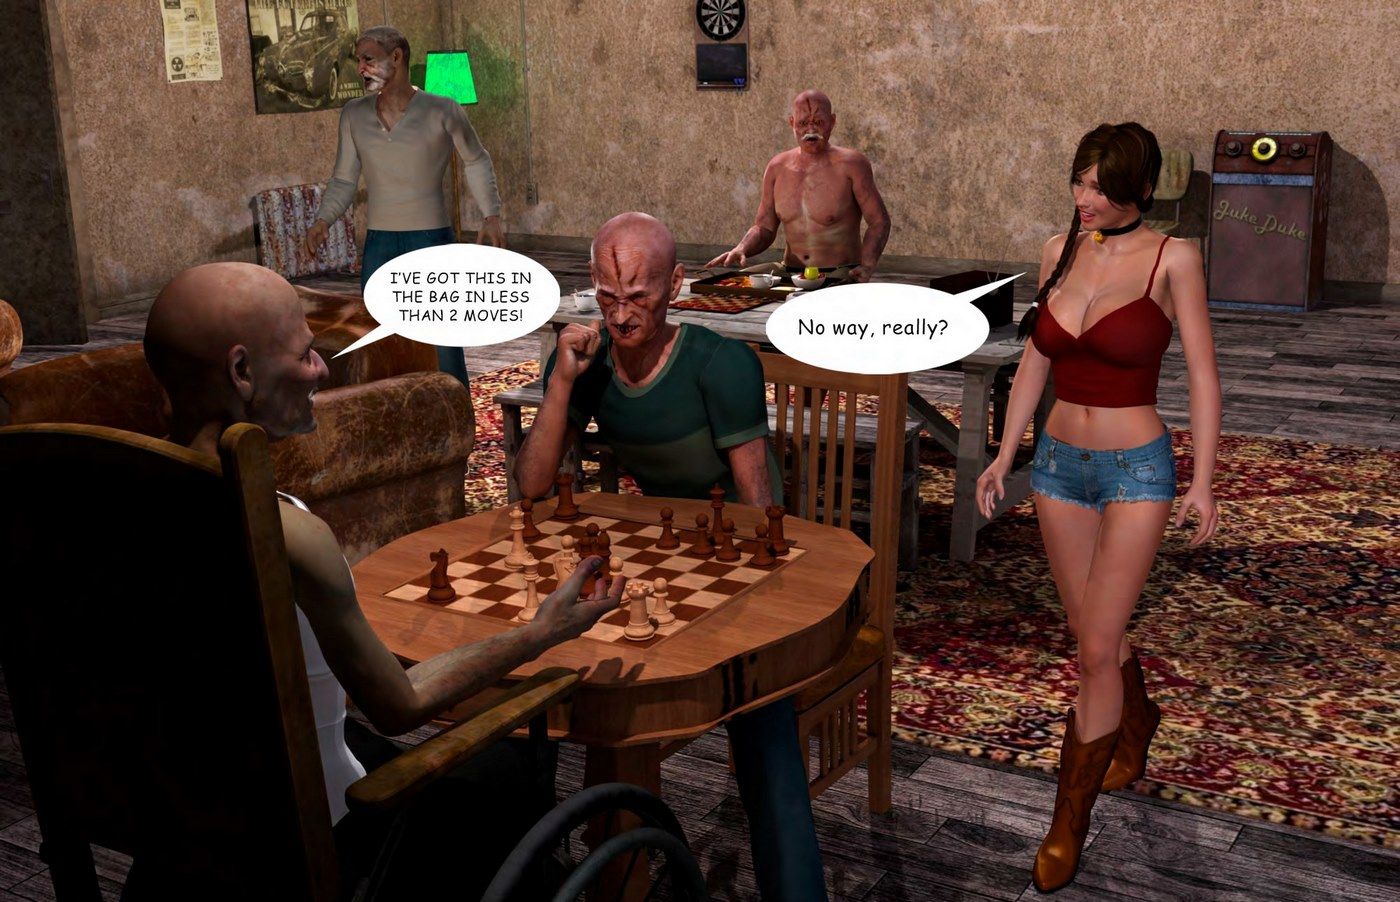 Lost Bet – Petra Helps The Elderly - part 2